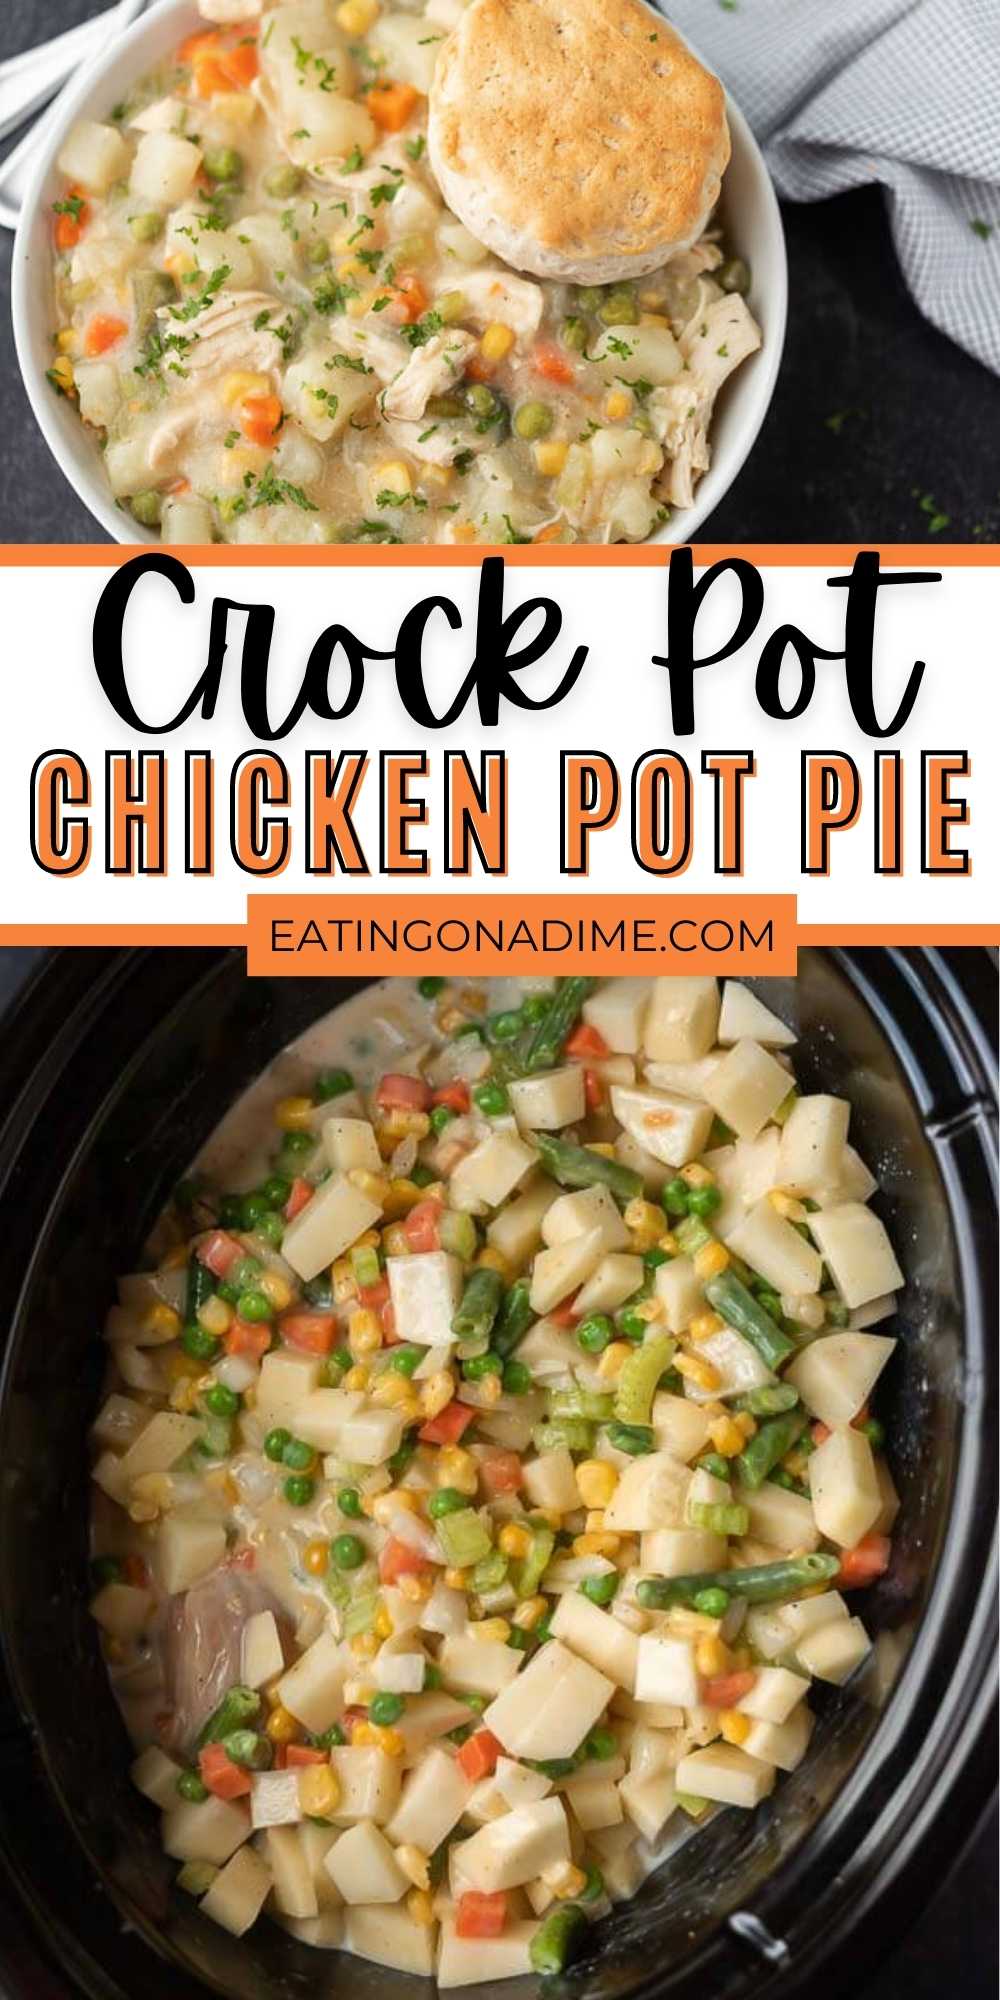 The Best Crock pot Chicken Pot Pie Recipe. You are going to love this easy chicken pot pie recipe with biscuits. It is our favorite crock pot recipe that is a family favorite! #eatingonadime #crockpotrecipes #slowcookerrecipes #chickenrecipes #chickenpotpie 
